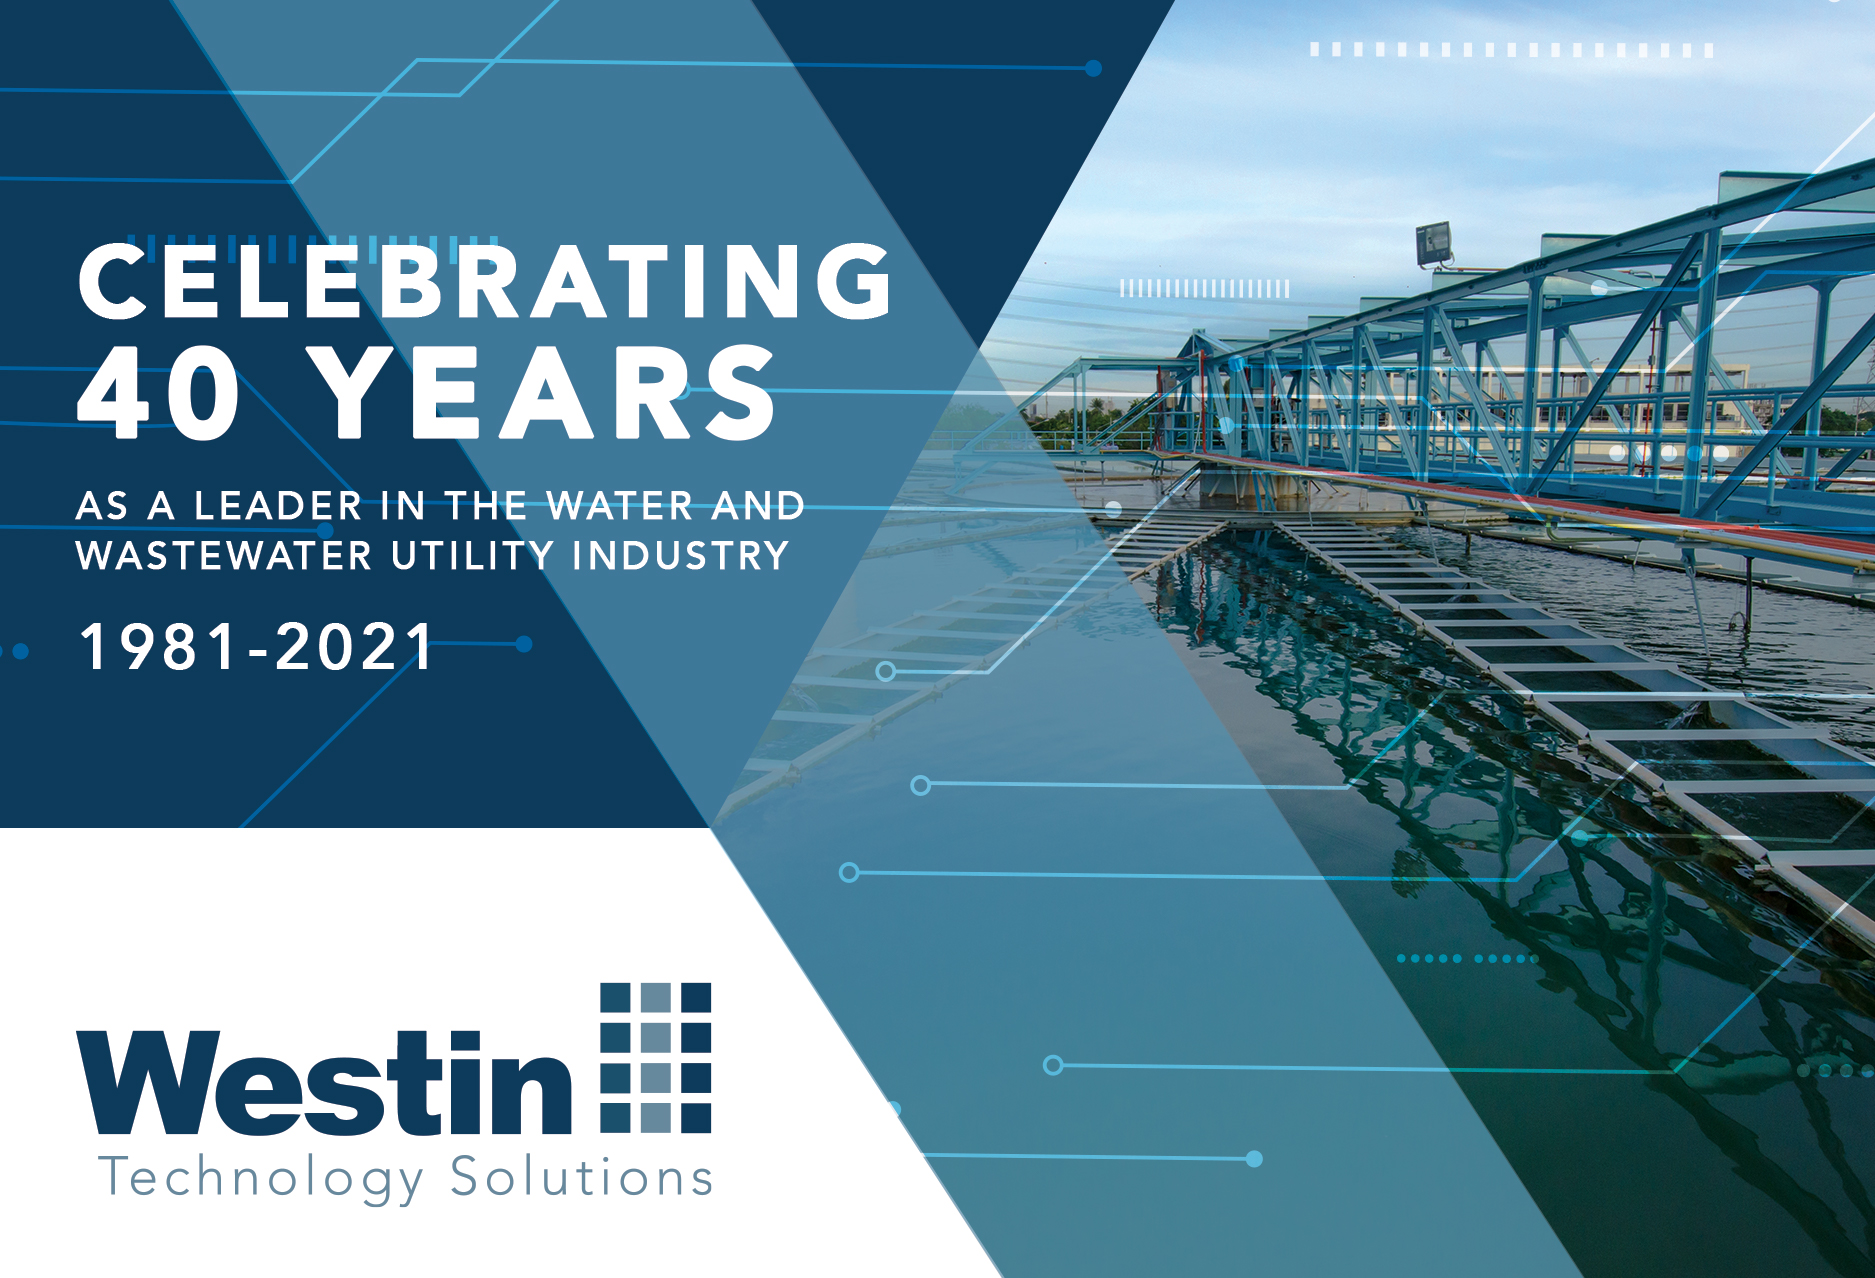 Westin Celebrates 40 Years as a Leader in the Water and Wastewater Utility Industry | Westin Delivers